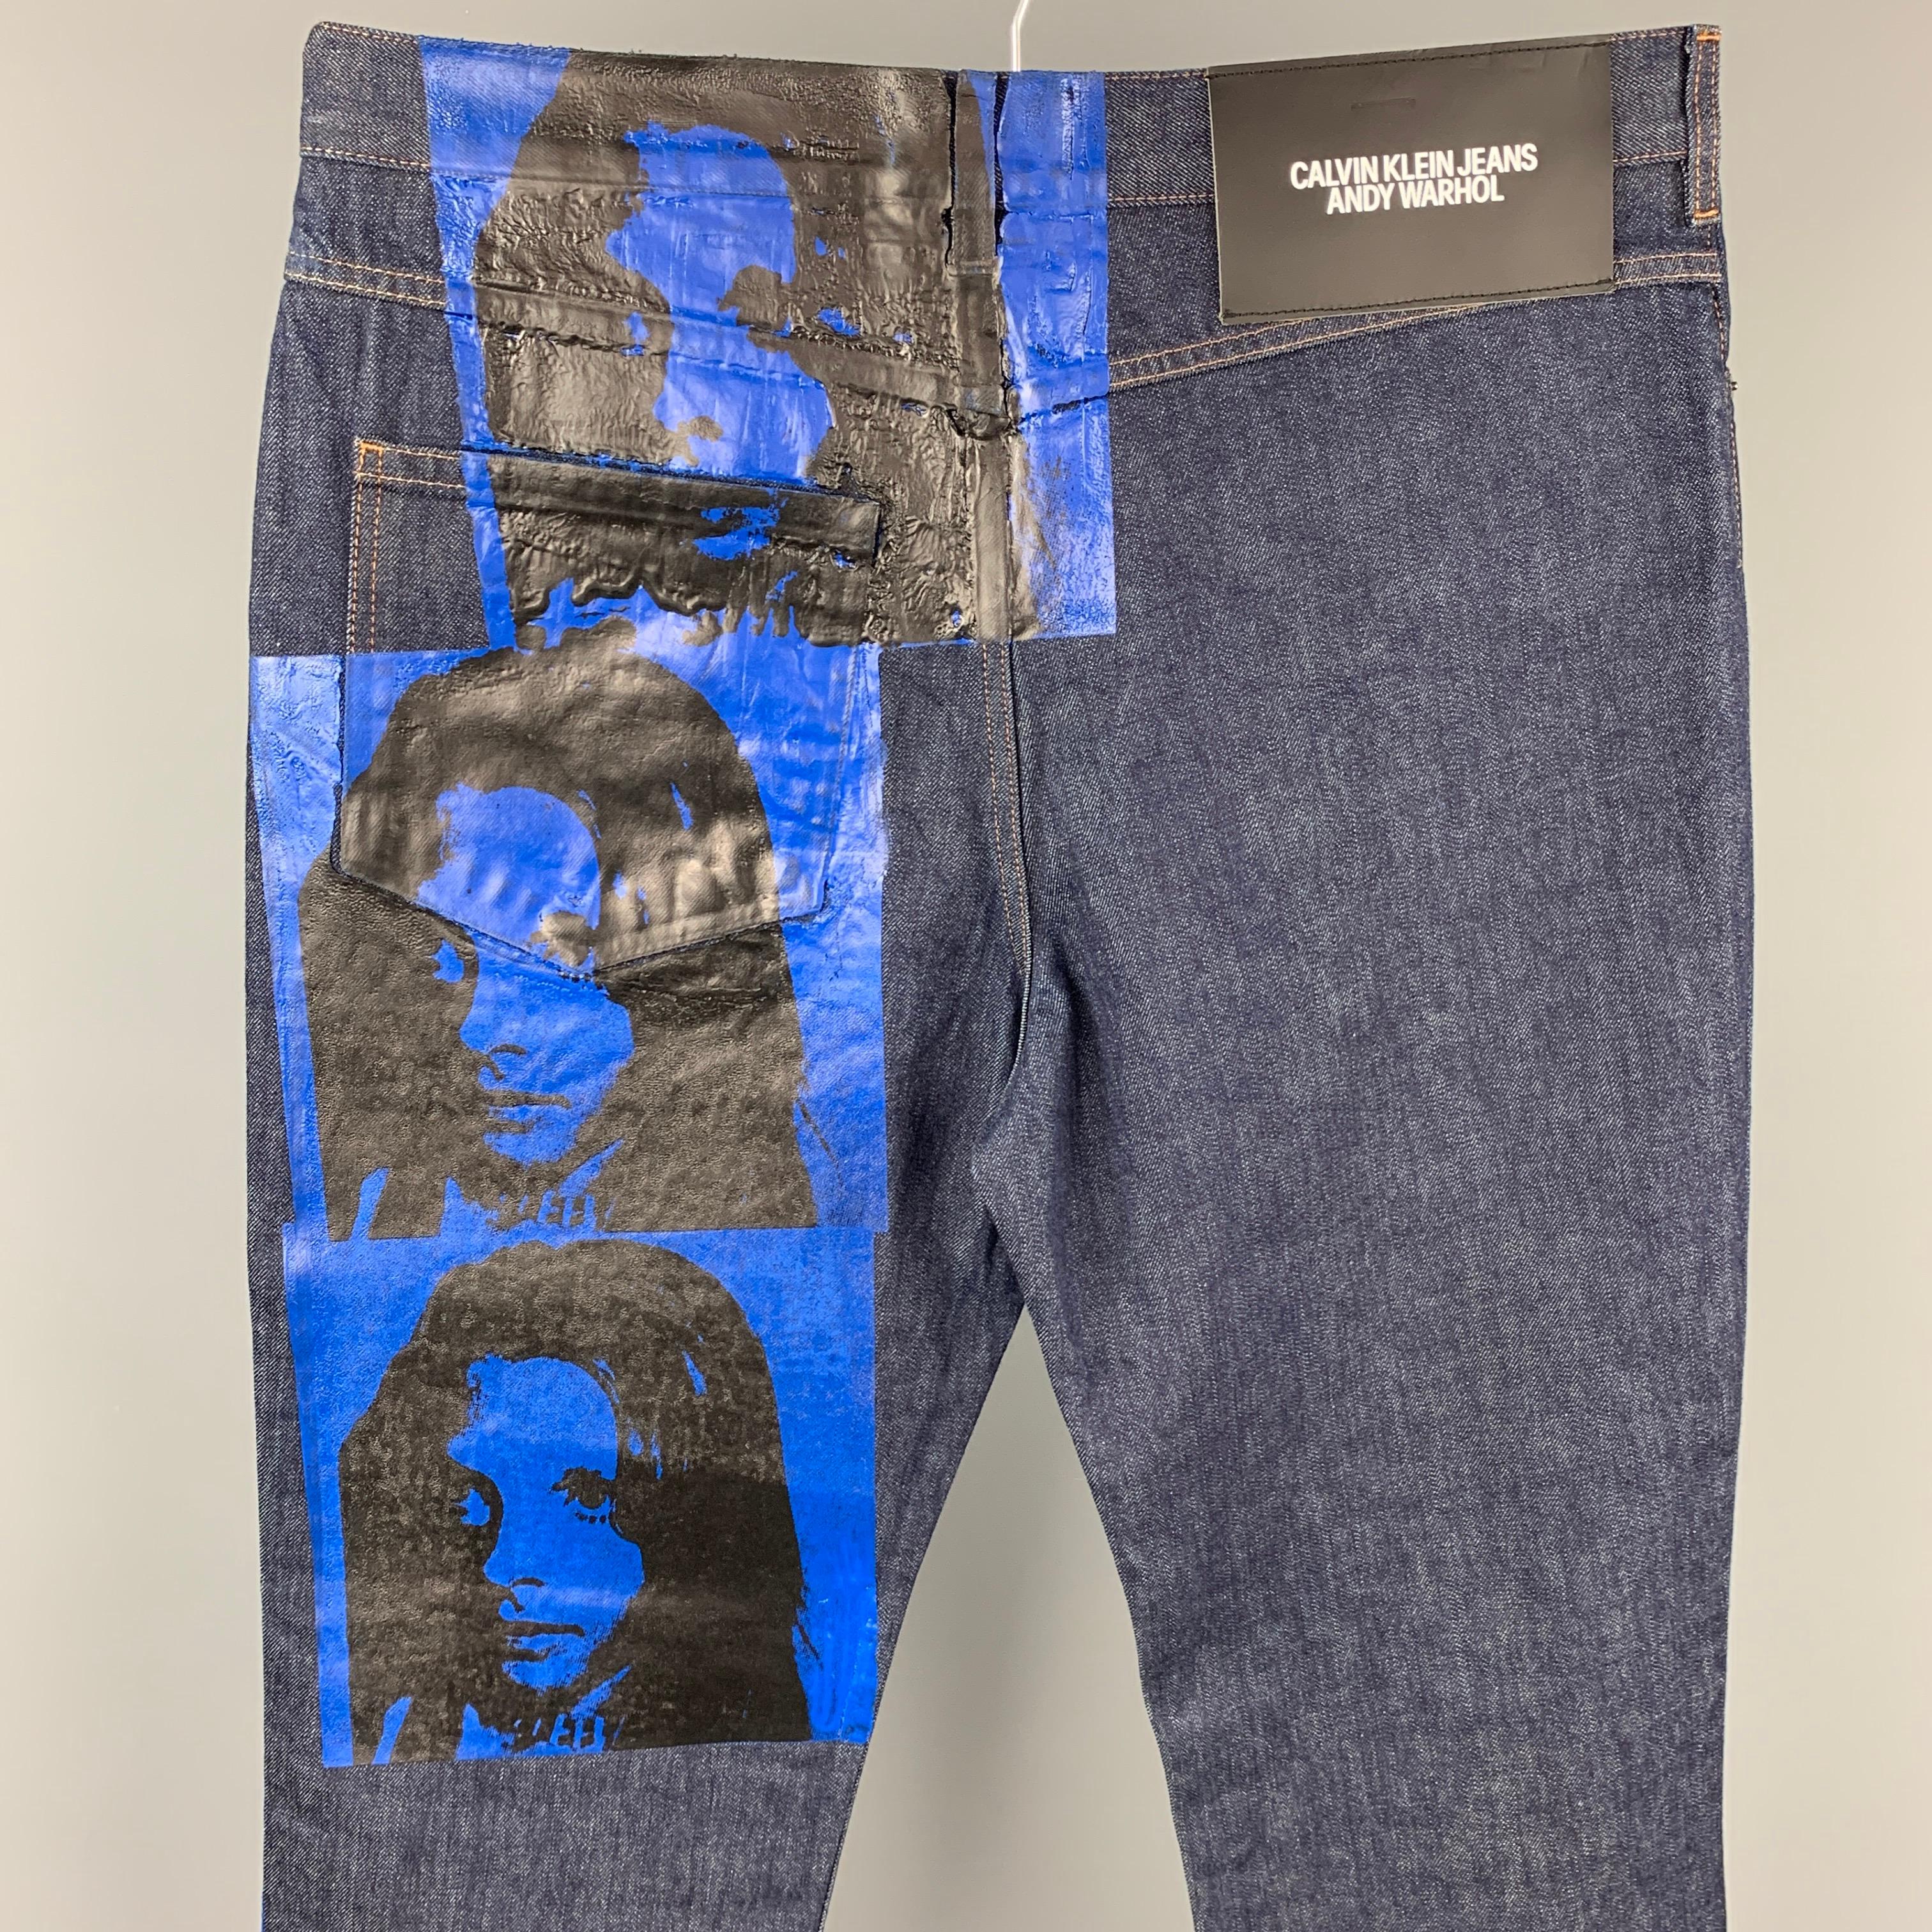 CALVIN KLEIN 205W39NYC by RAF SIMONS x Andy Warhol jeans comes in a indigo denim with a 70's Sandra Brant painted design featuring a regular fit, contrast stitching, and a zip fly closure. Made in Italy.

Very Good Pre-Owned Condition.
Marked: